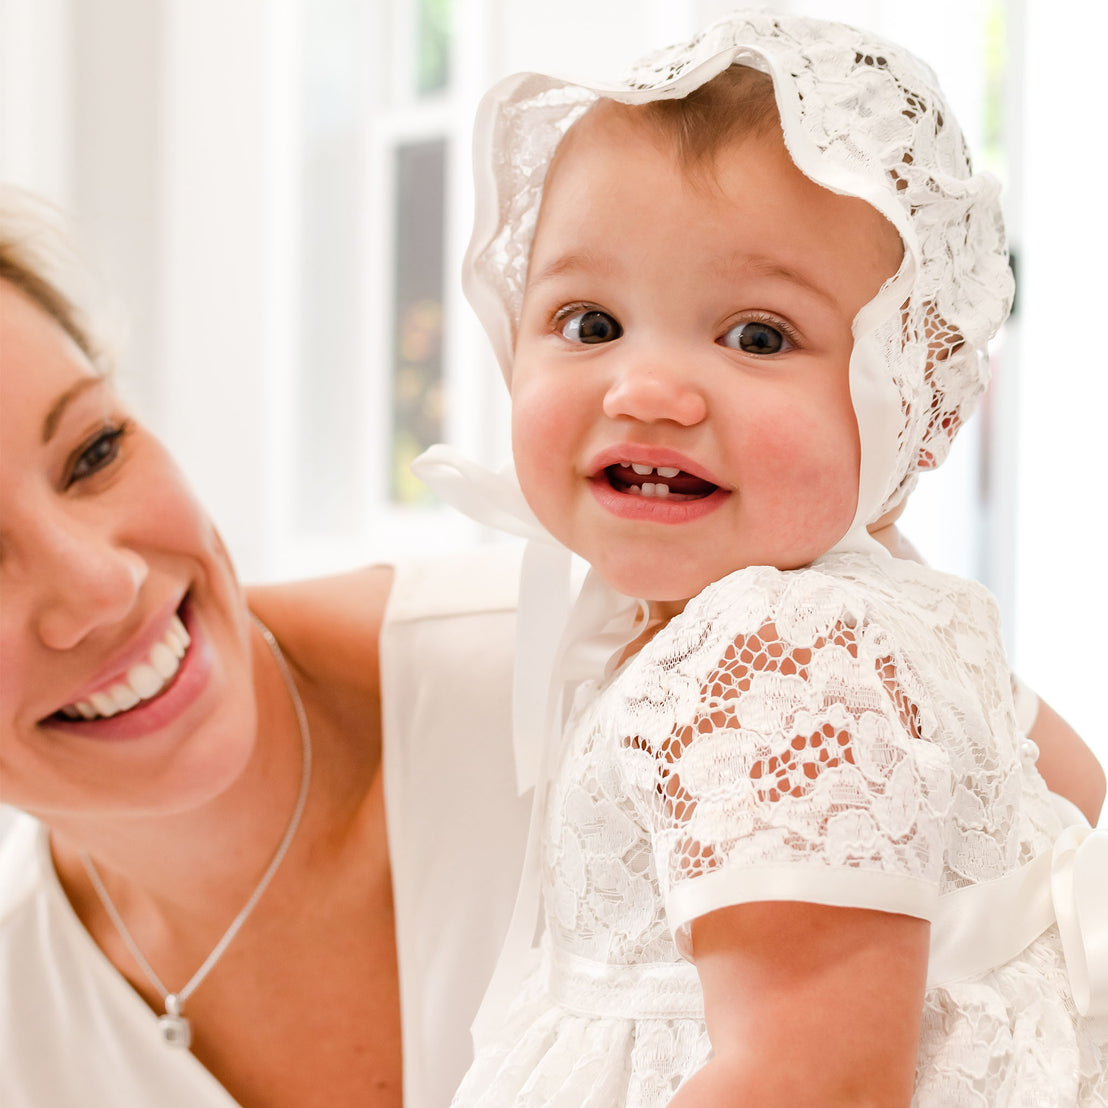 A joyful baby in a Rose Christening Gown & Bonnet smiles widely, held by a smiling woman with blonde hair. They are both indoors with a bright, airy background.